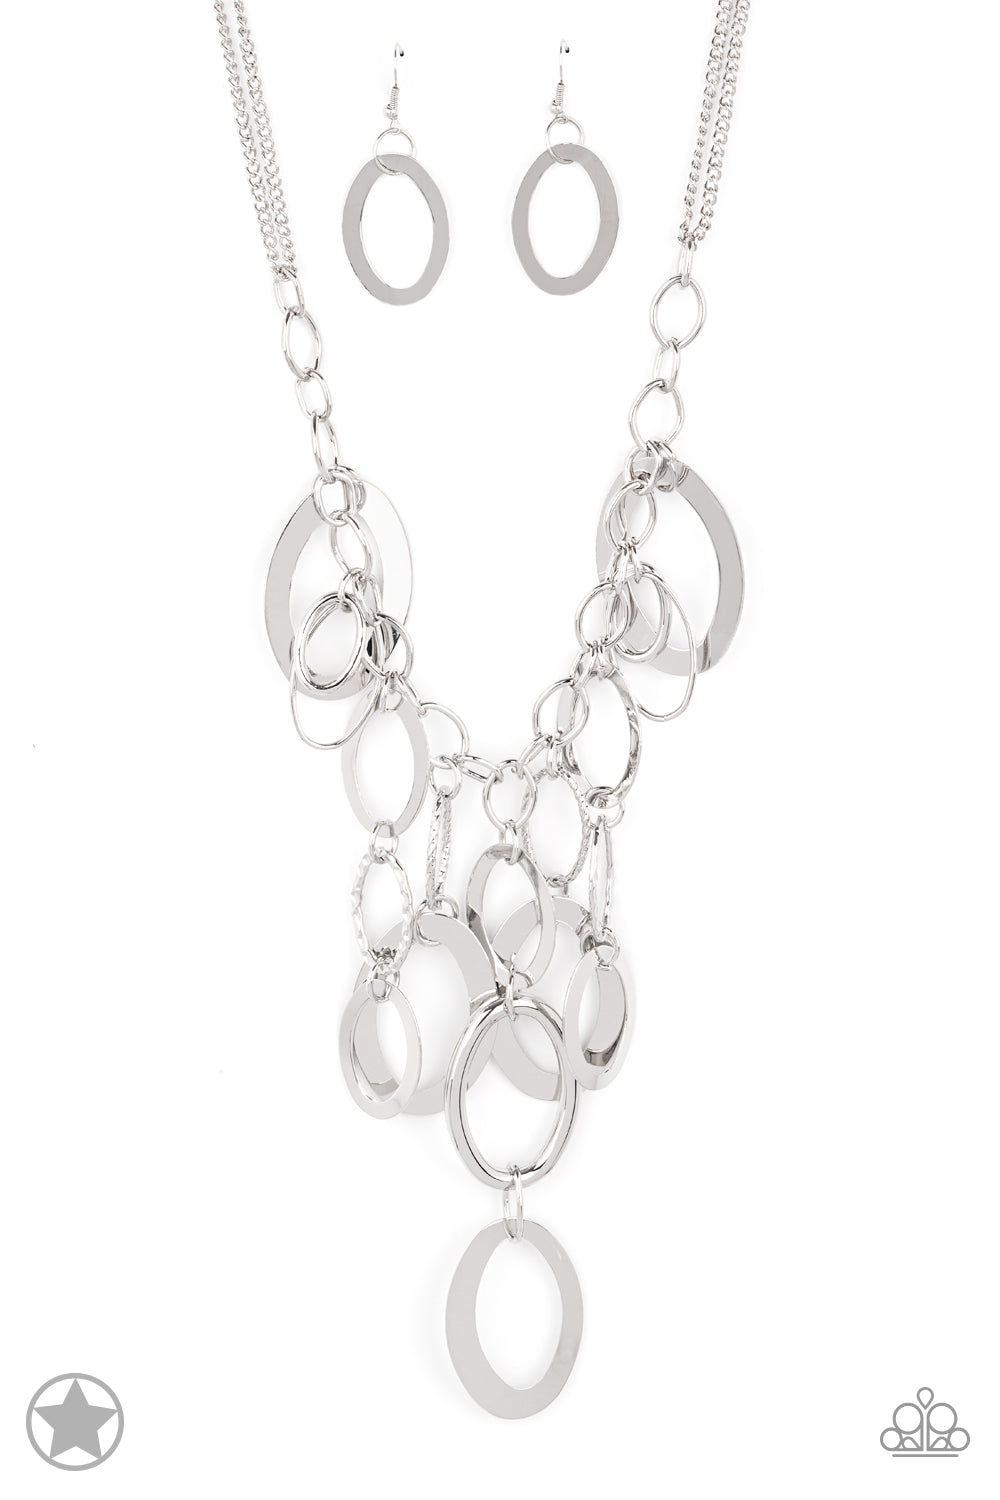 A Silver Spell - Silver Fashion Necklace - Paparazzi Accessories - Large silver links and shimmering textured silver rings cascade below a silver chain freely, allowing for movement that makes a bold statement. Features an adjustable clasp closure. Sold as one individual necklace.